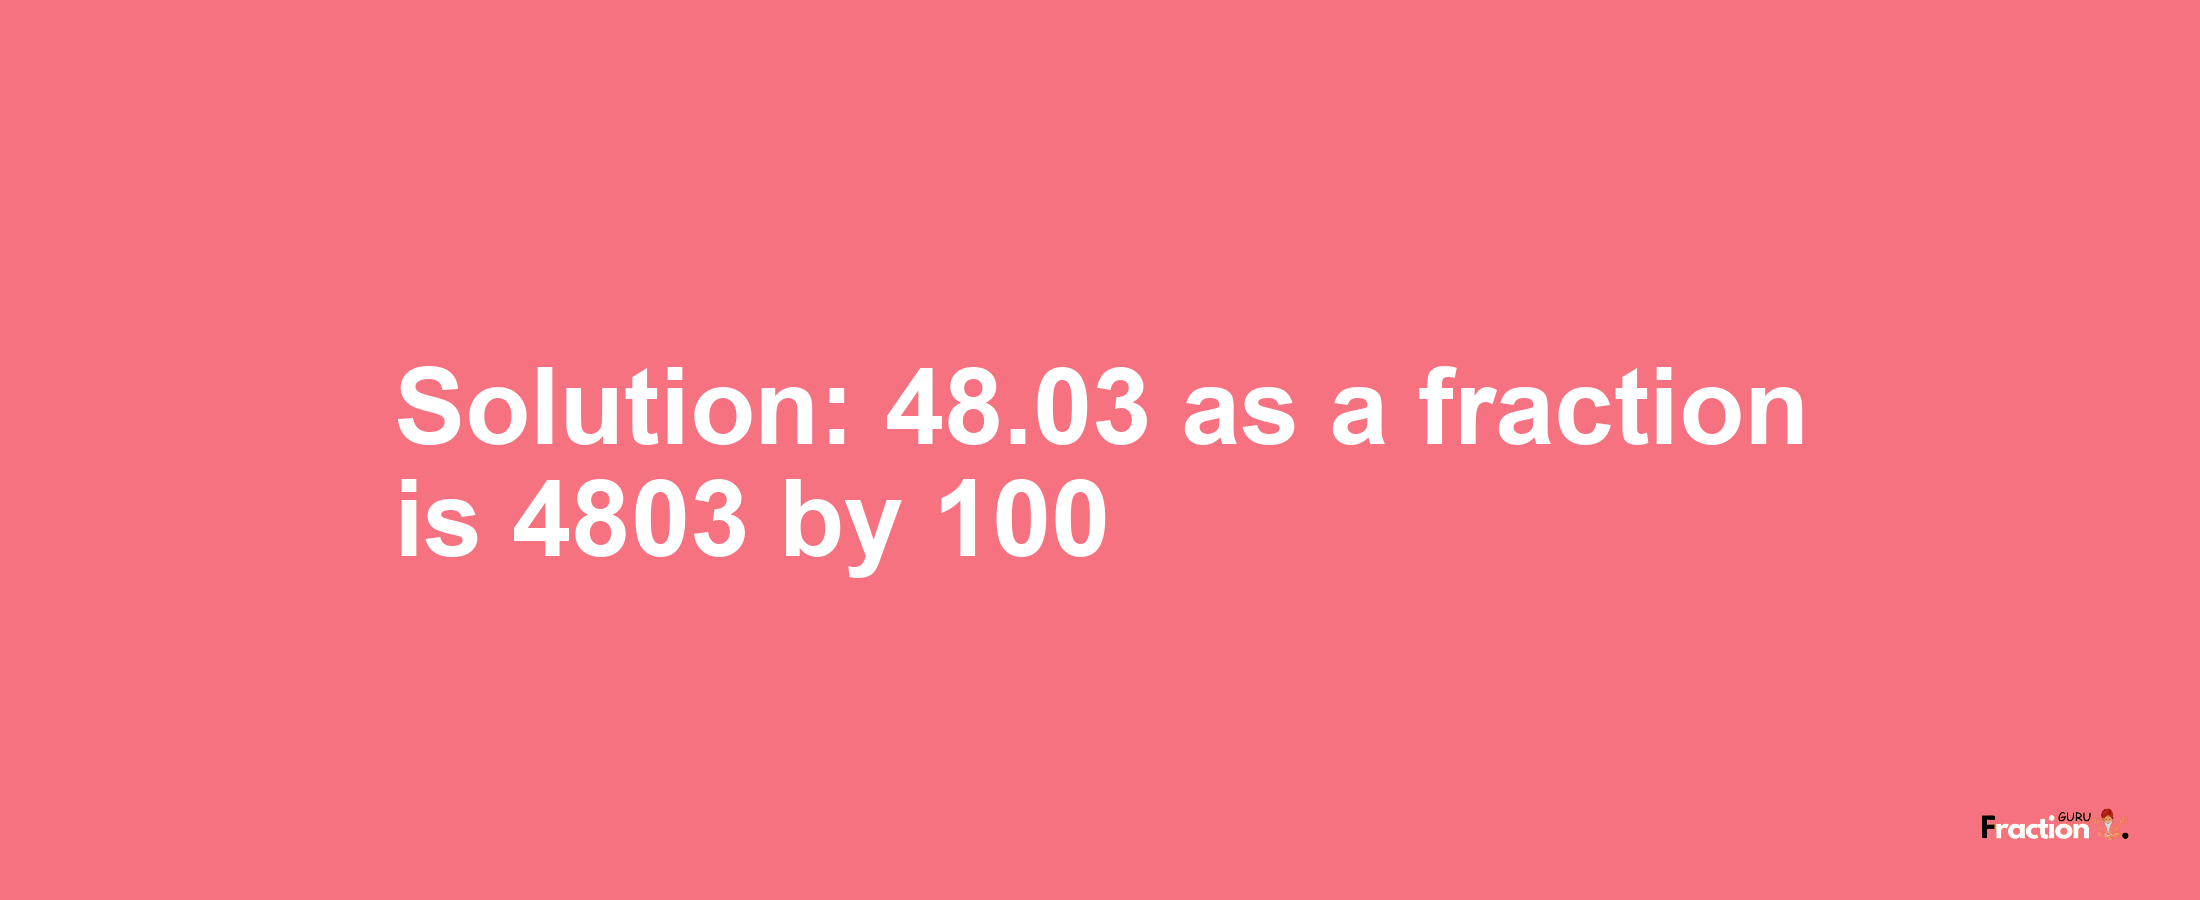 Solution:48.03 as a fraction is 4803/100